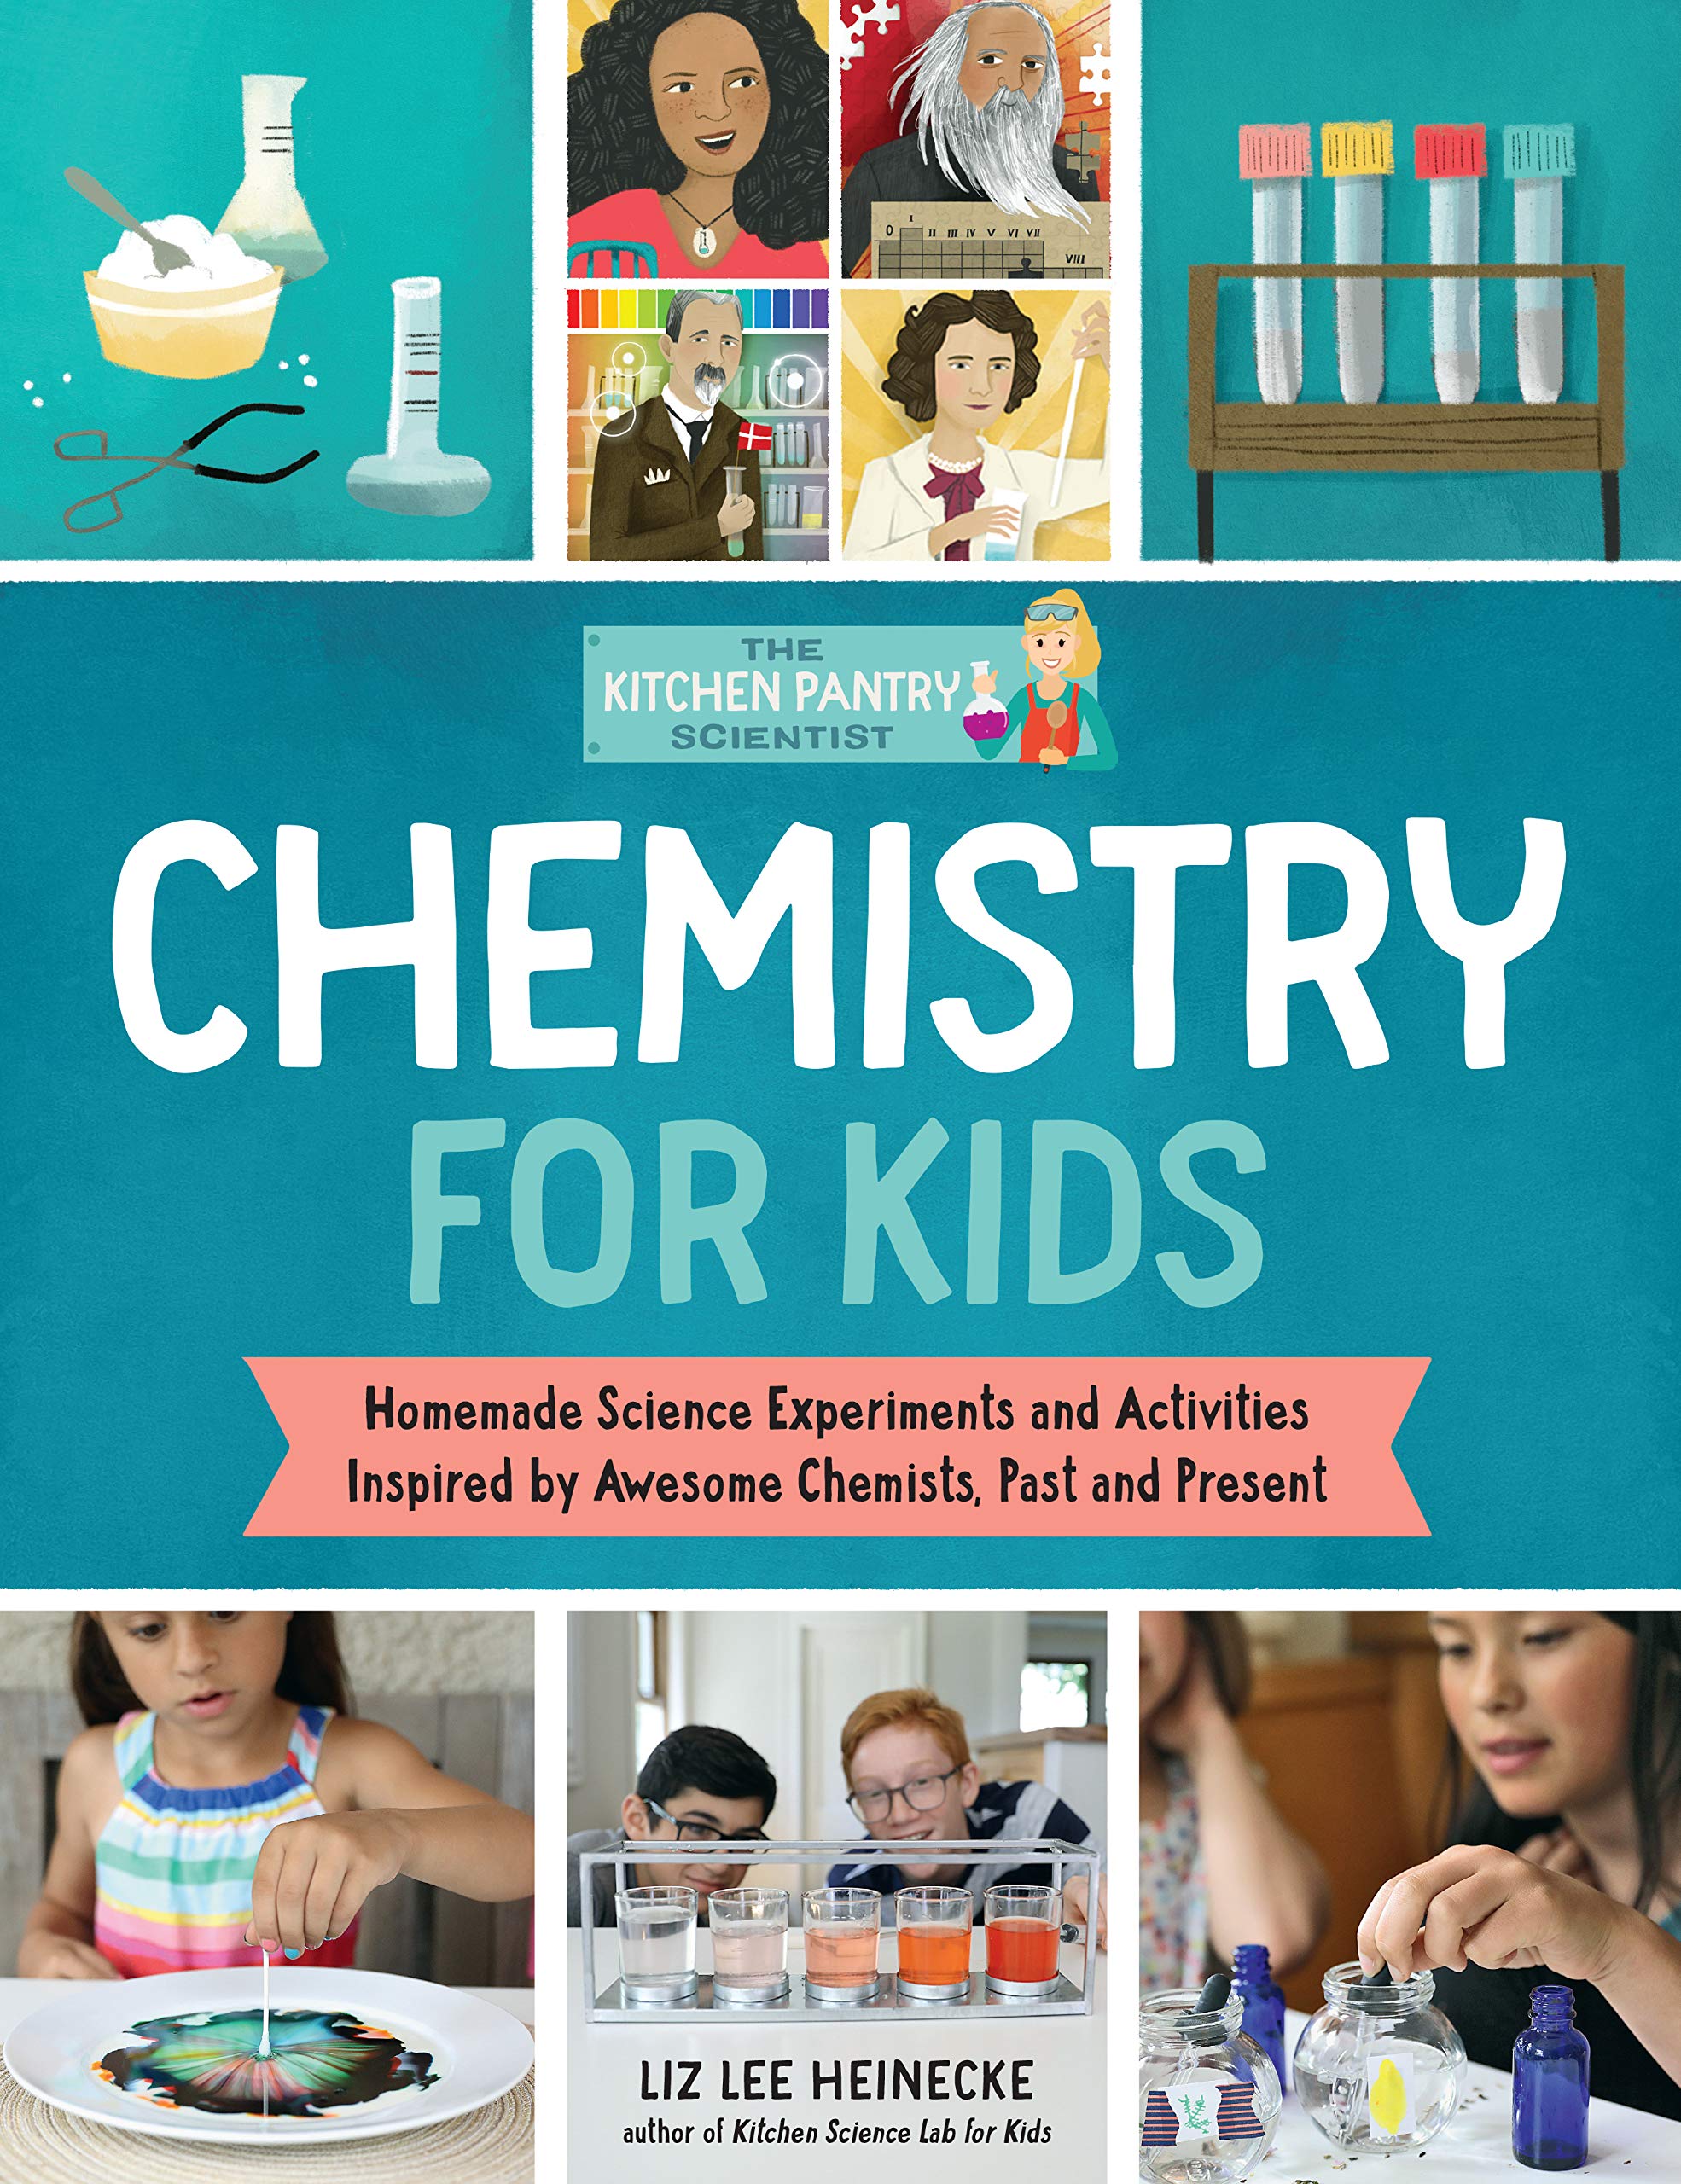 The Kitchen Pantry ­Scientist: Chemistry for Kids: Homemade Science Experiments and Activities Inspired by Awesome Chemists, Past and Present